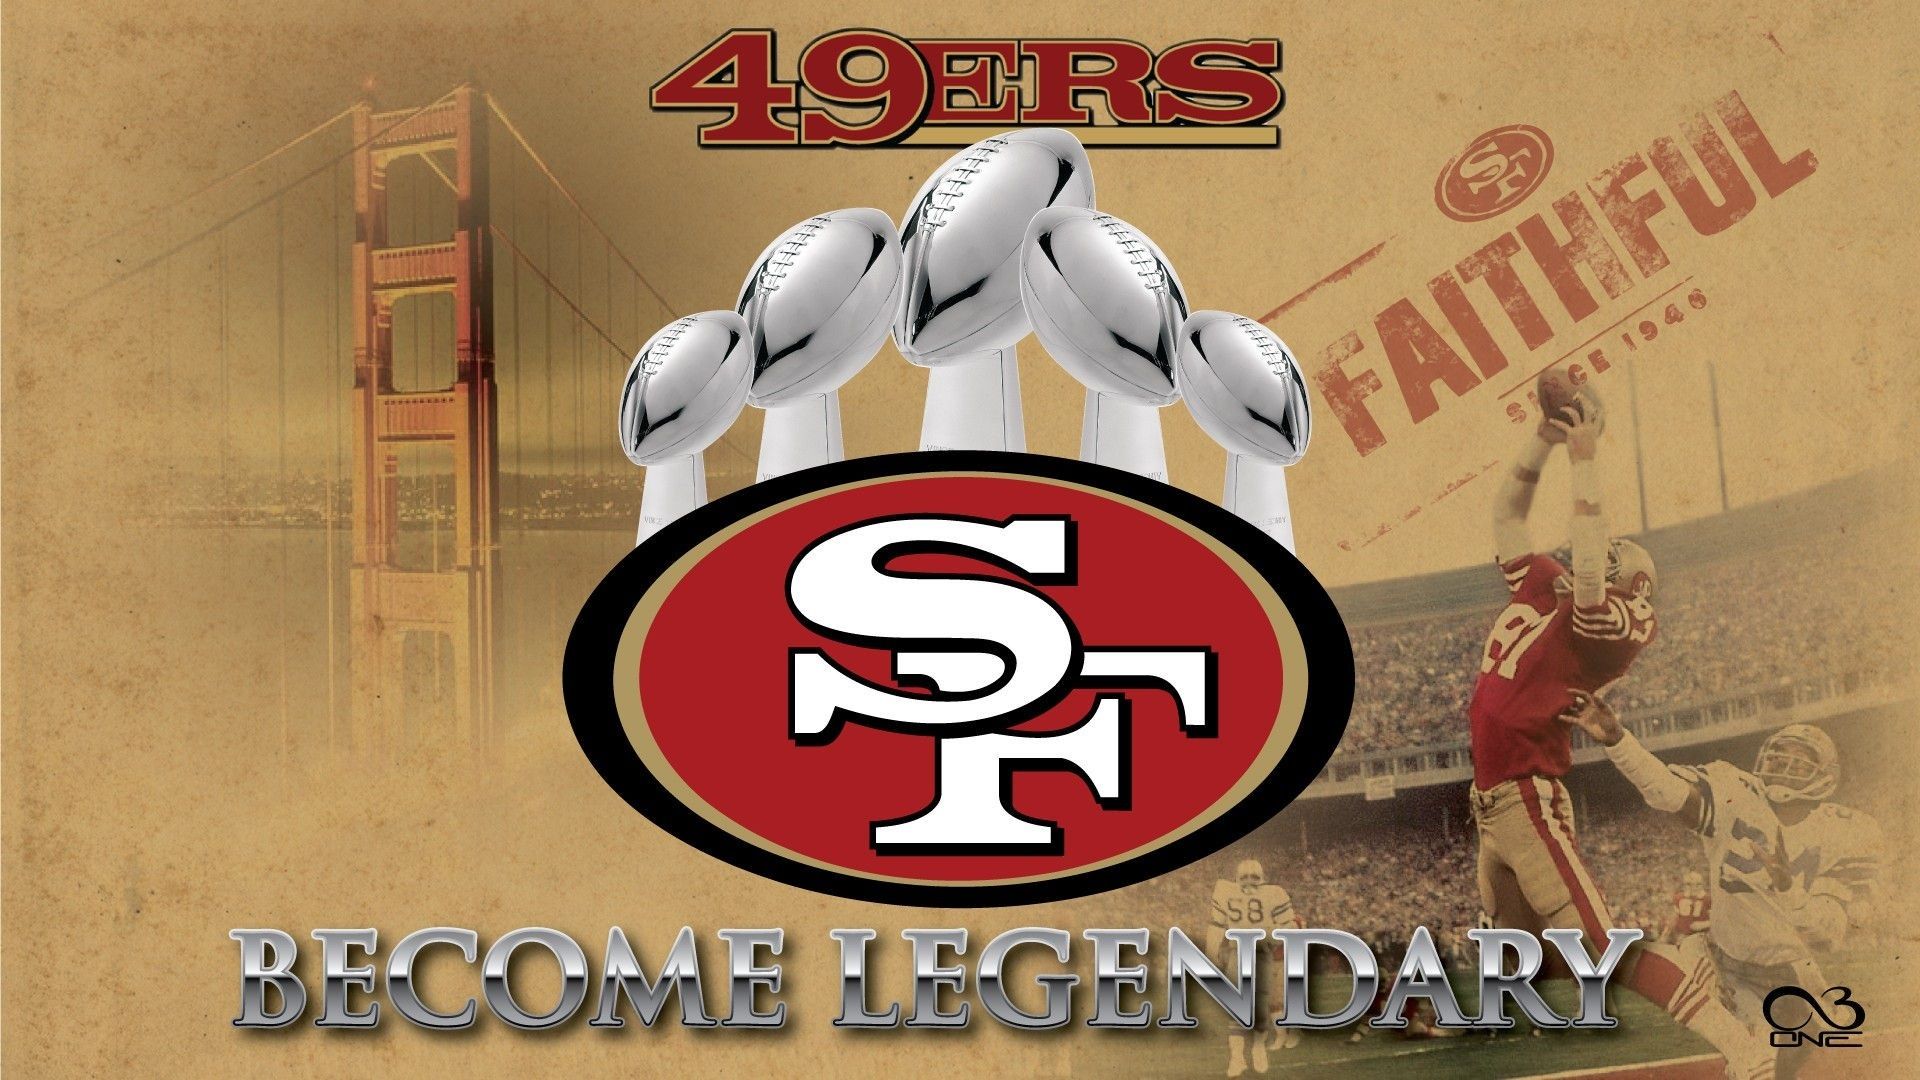 San Francisco 49ers Wallpaper For Mac Background NFL Football Wallpaper. San francisco 49ers logo, San francisco 49ers, San francisco 49ers football